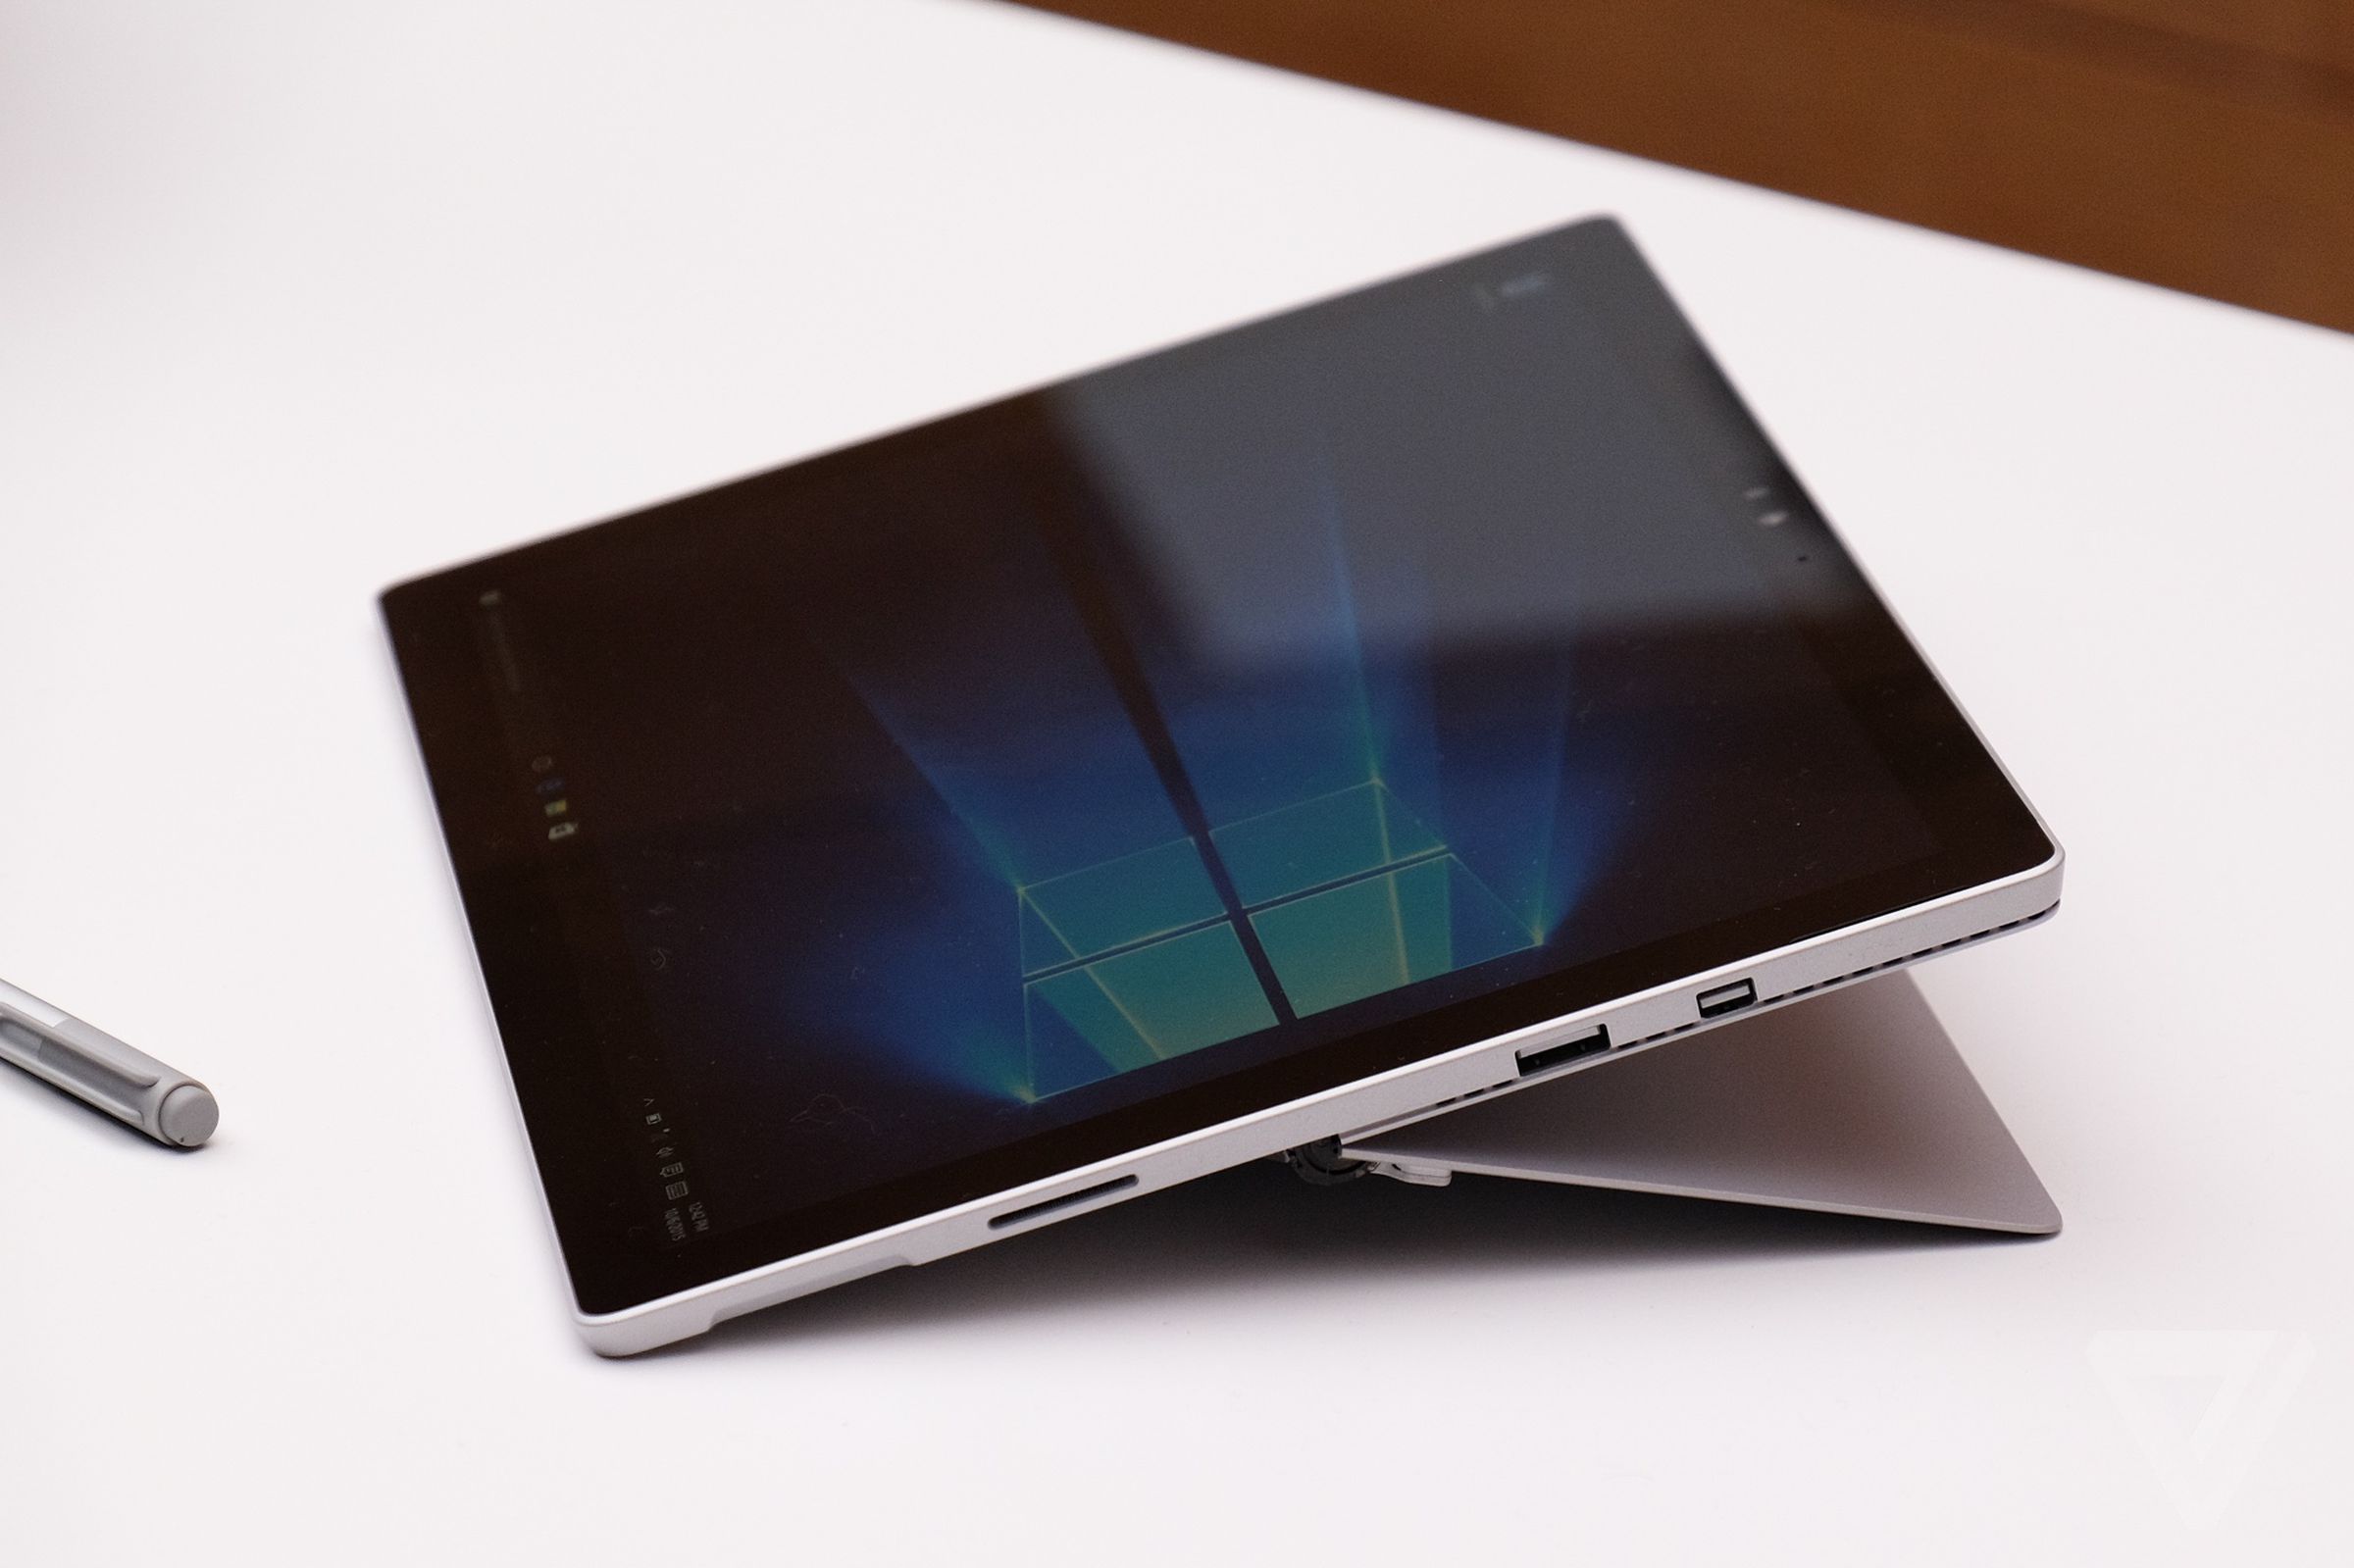 Microsoft Surface Pro 4 hands-on photos